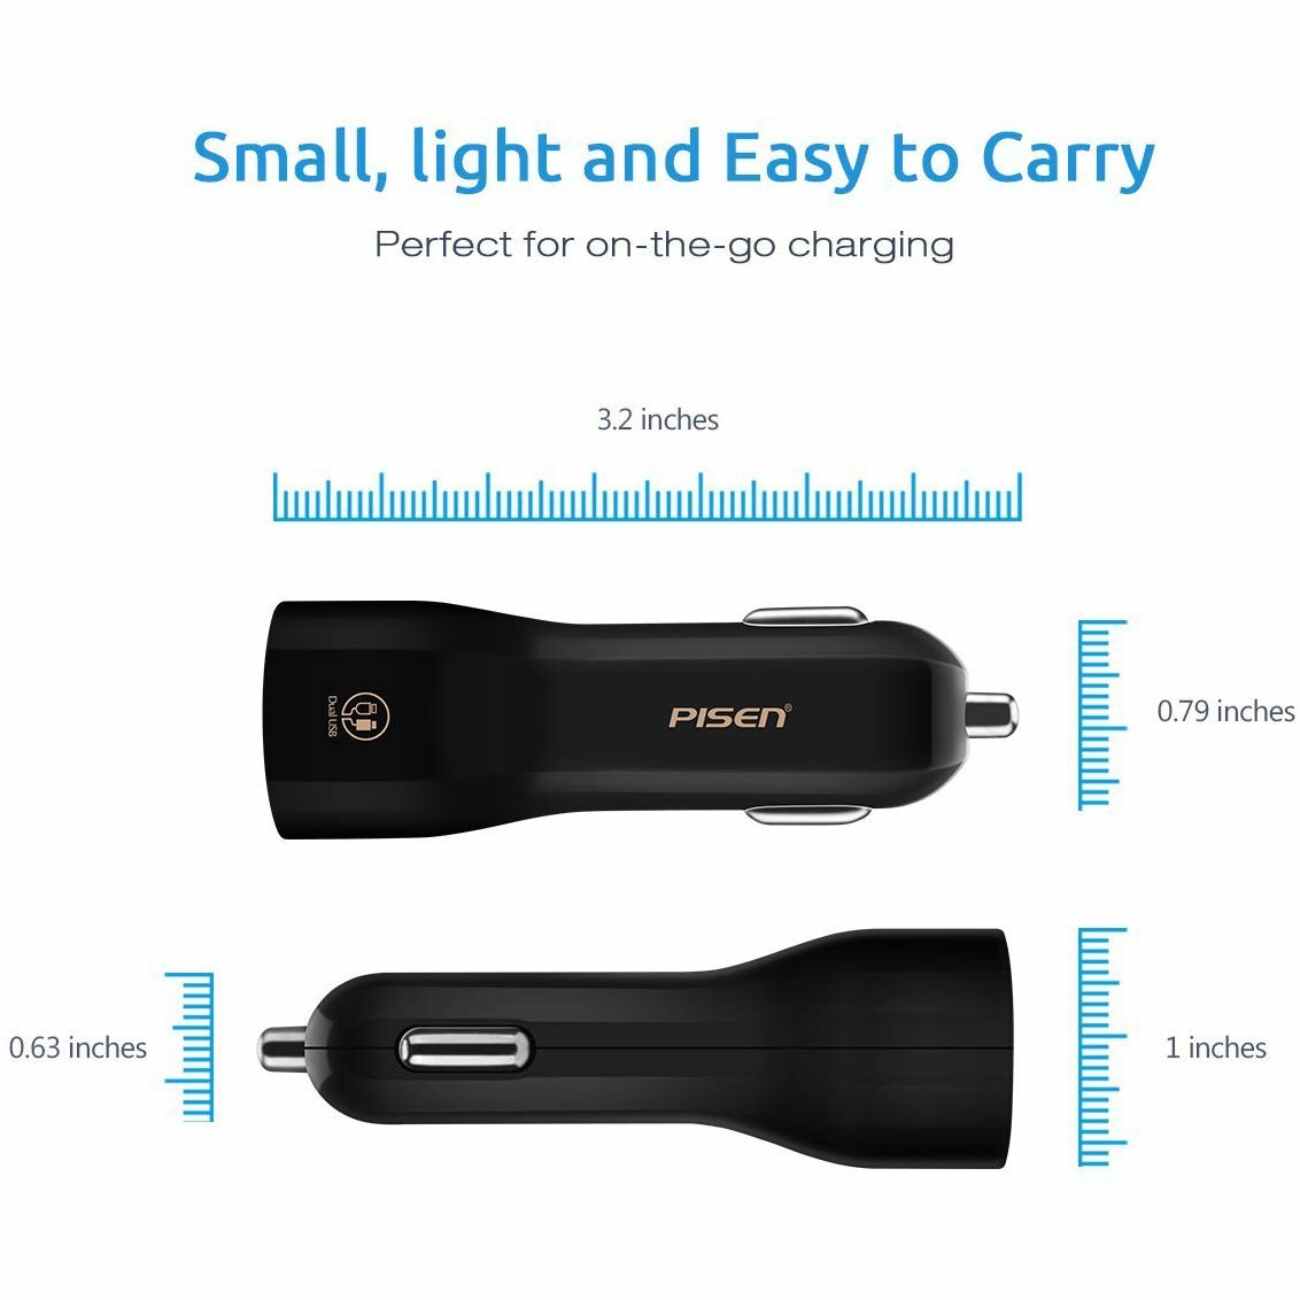 Car Charger with 2 USB Output In Black